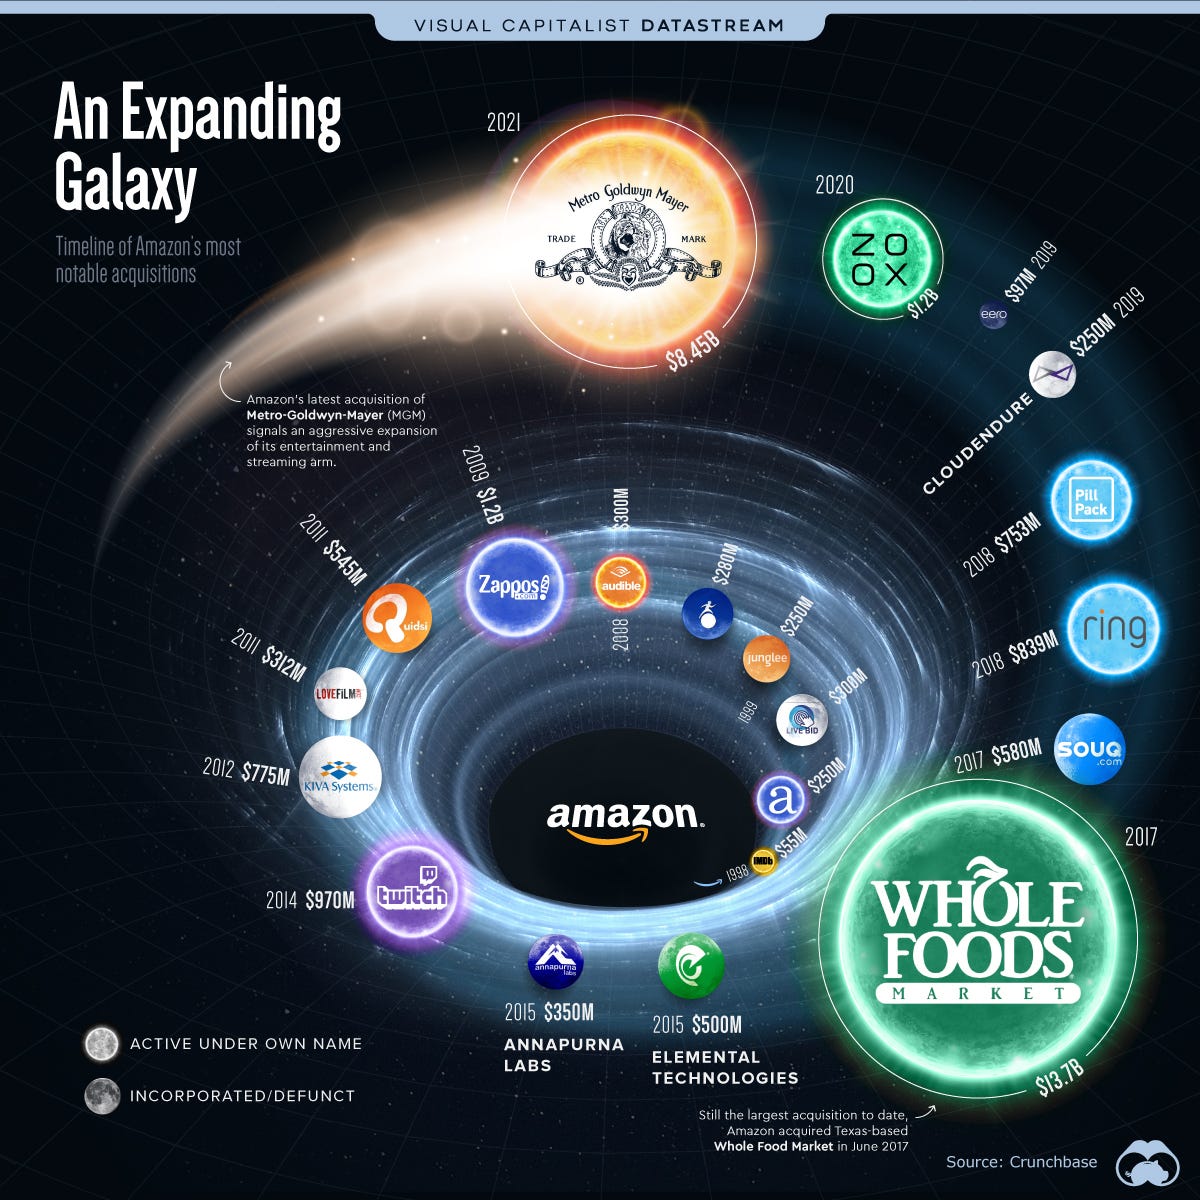 Most Notable Acquisitions by Amazon